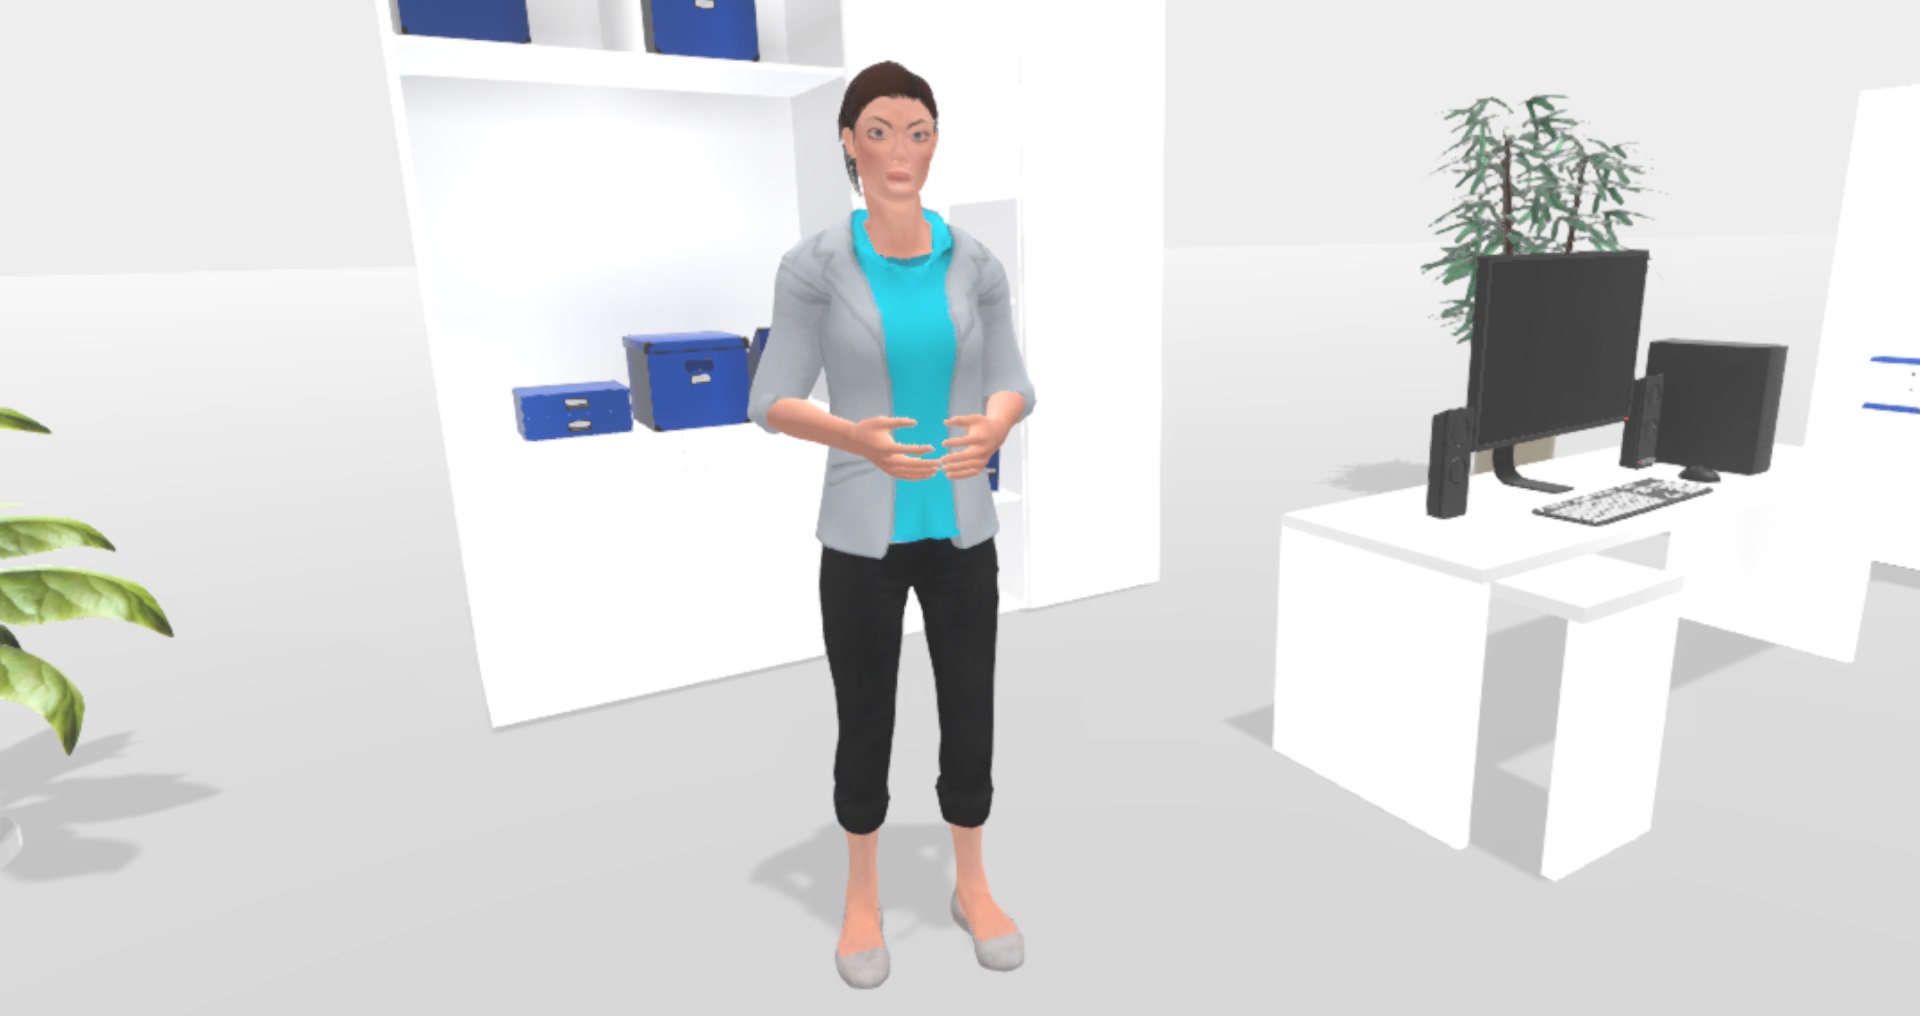 NHS mental health services to offer virtual reality treatment 